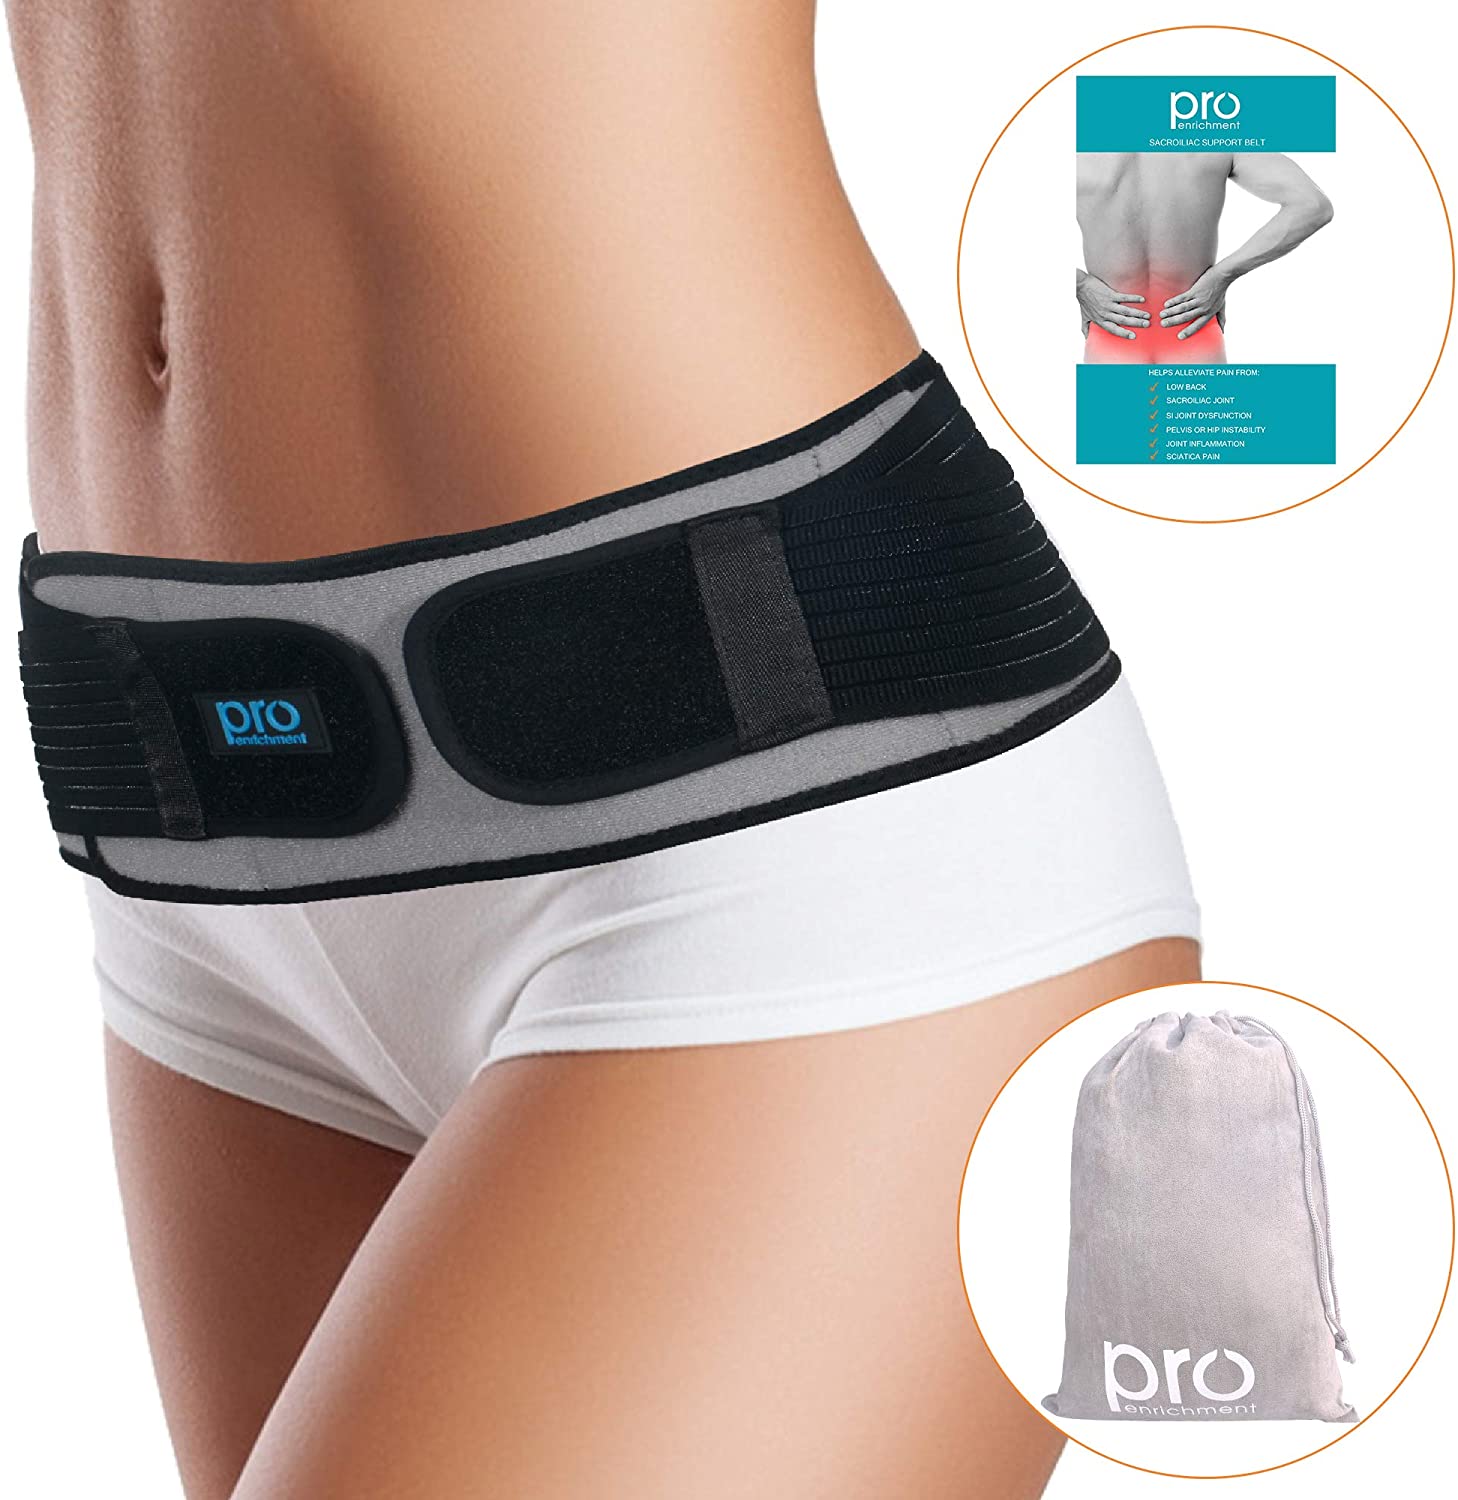 Sparthos Sacroiliac Si Hip Belt Relief from Si Joint, Sciatica, Pelvis,  Lower Back Pain - Support Brace for Women and Men - for Sacral Nerve, Hip  Loc